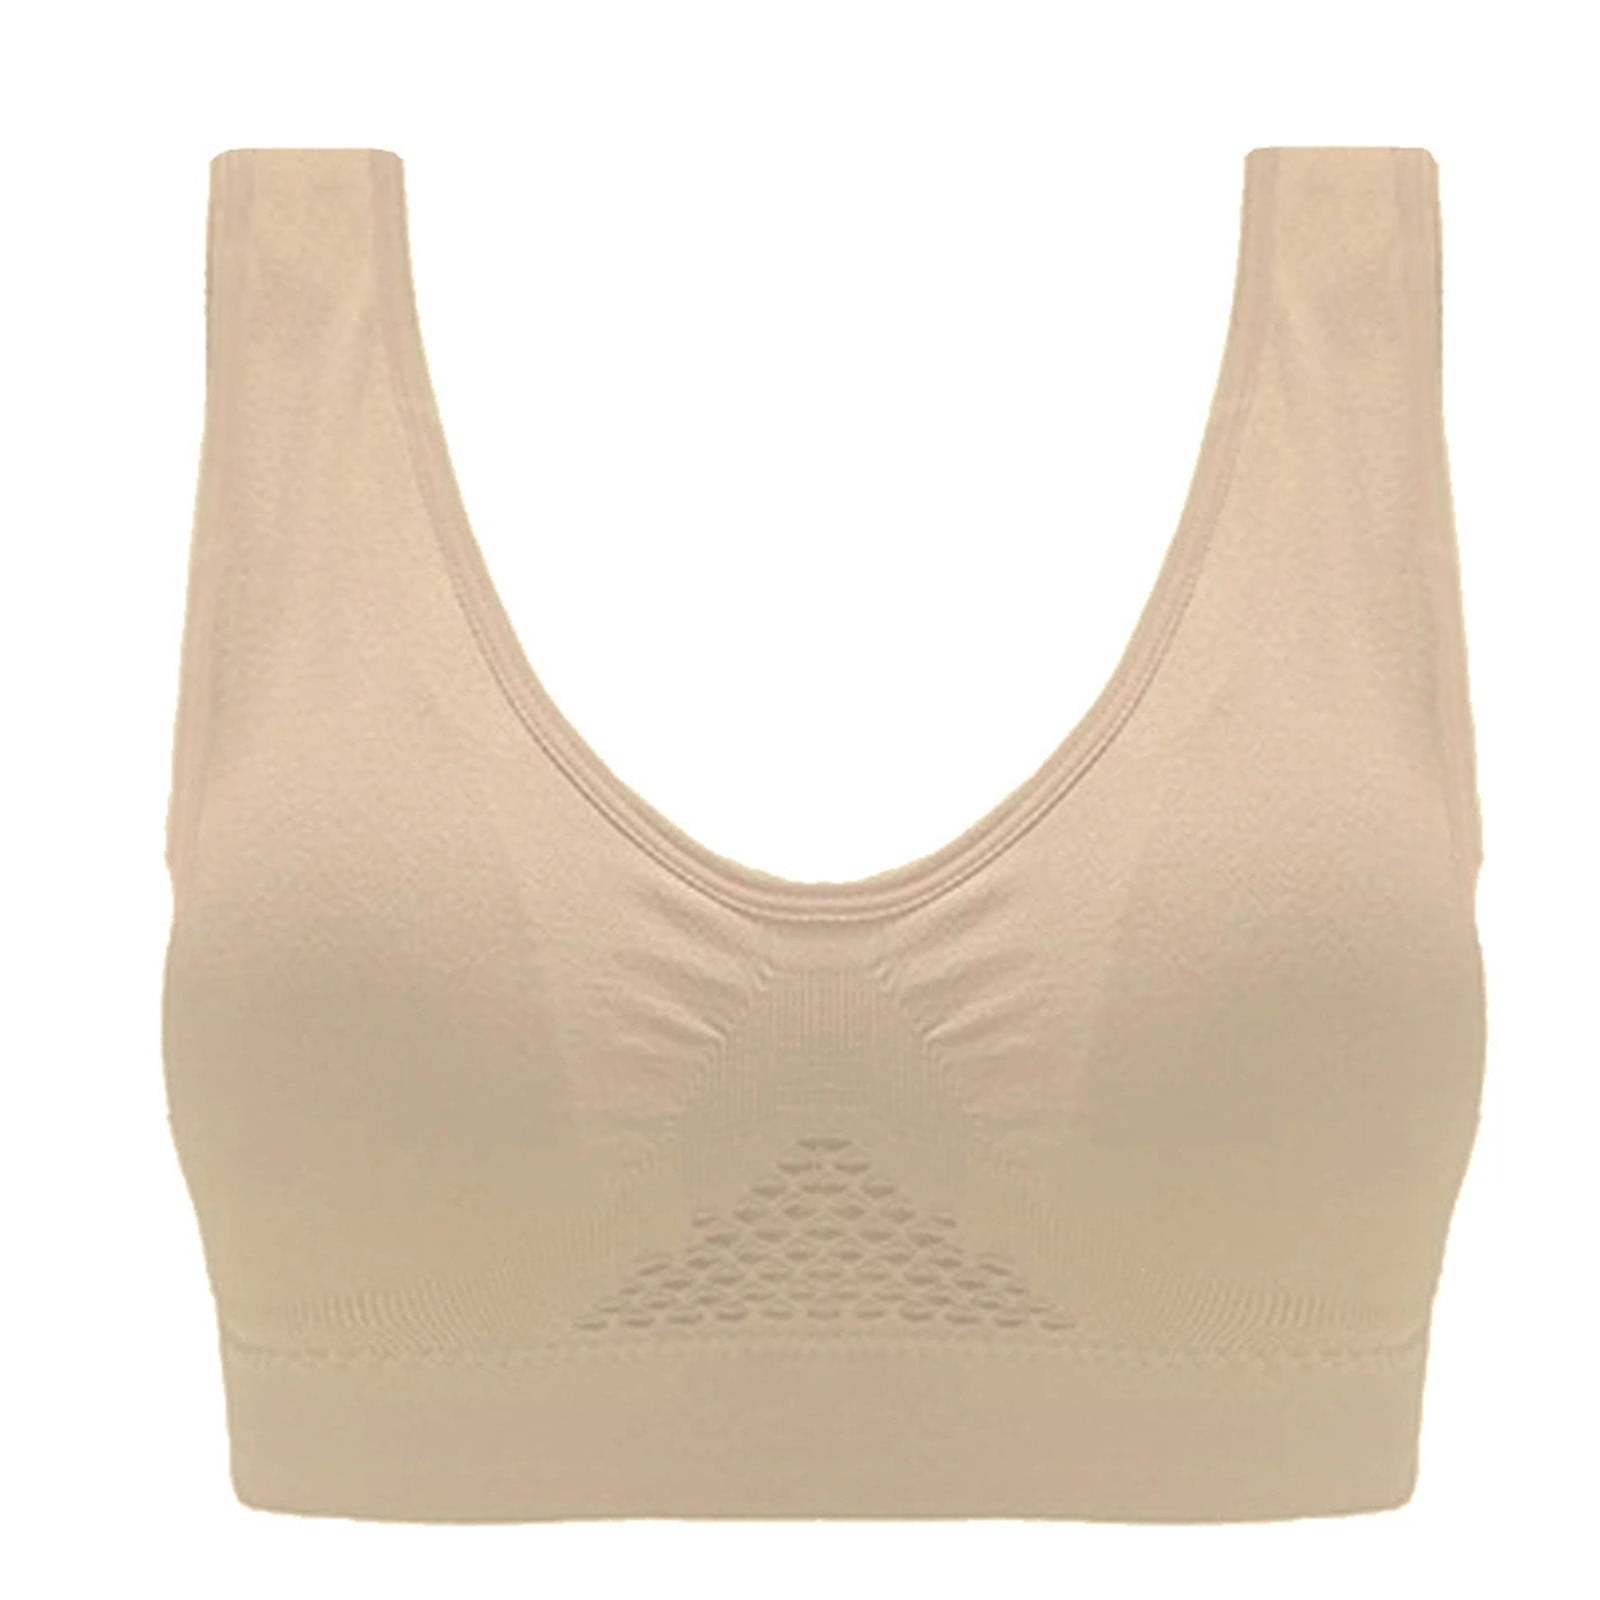 Bigersell Wireless Push up Bras for Women Summer Wireless Bras with Support  and Lift Molded Bra Style B4880 V-Neck No Underwire Bras Pull-On Bra  Closure Big Girls Plus Size Balconette Bras Beige